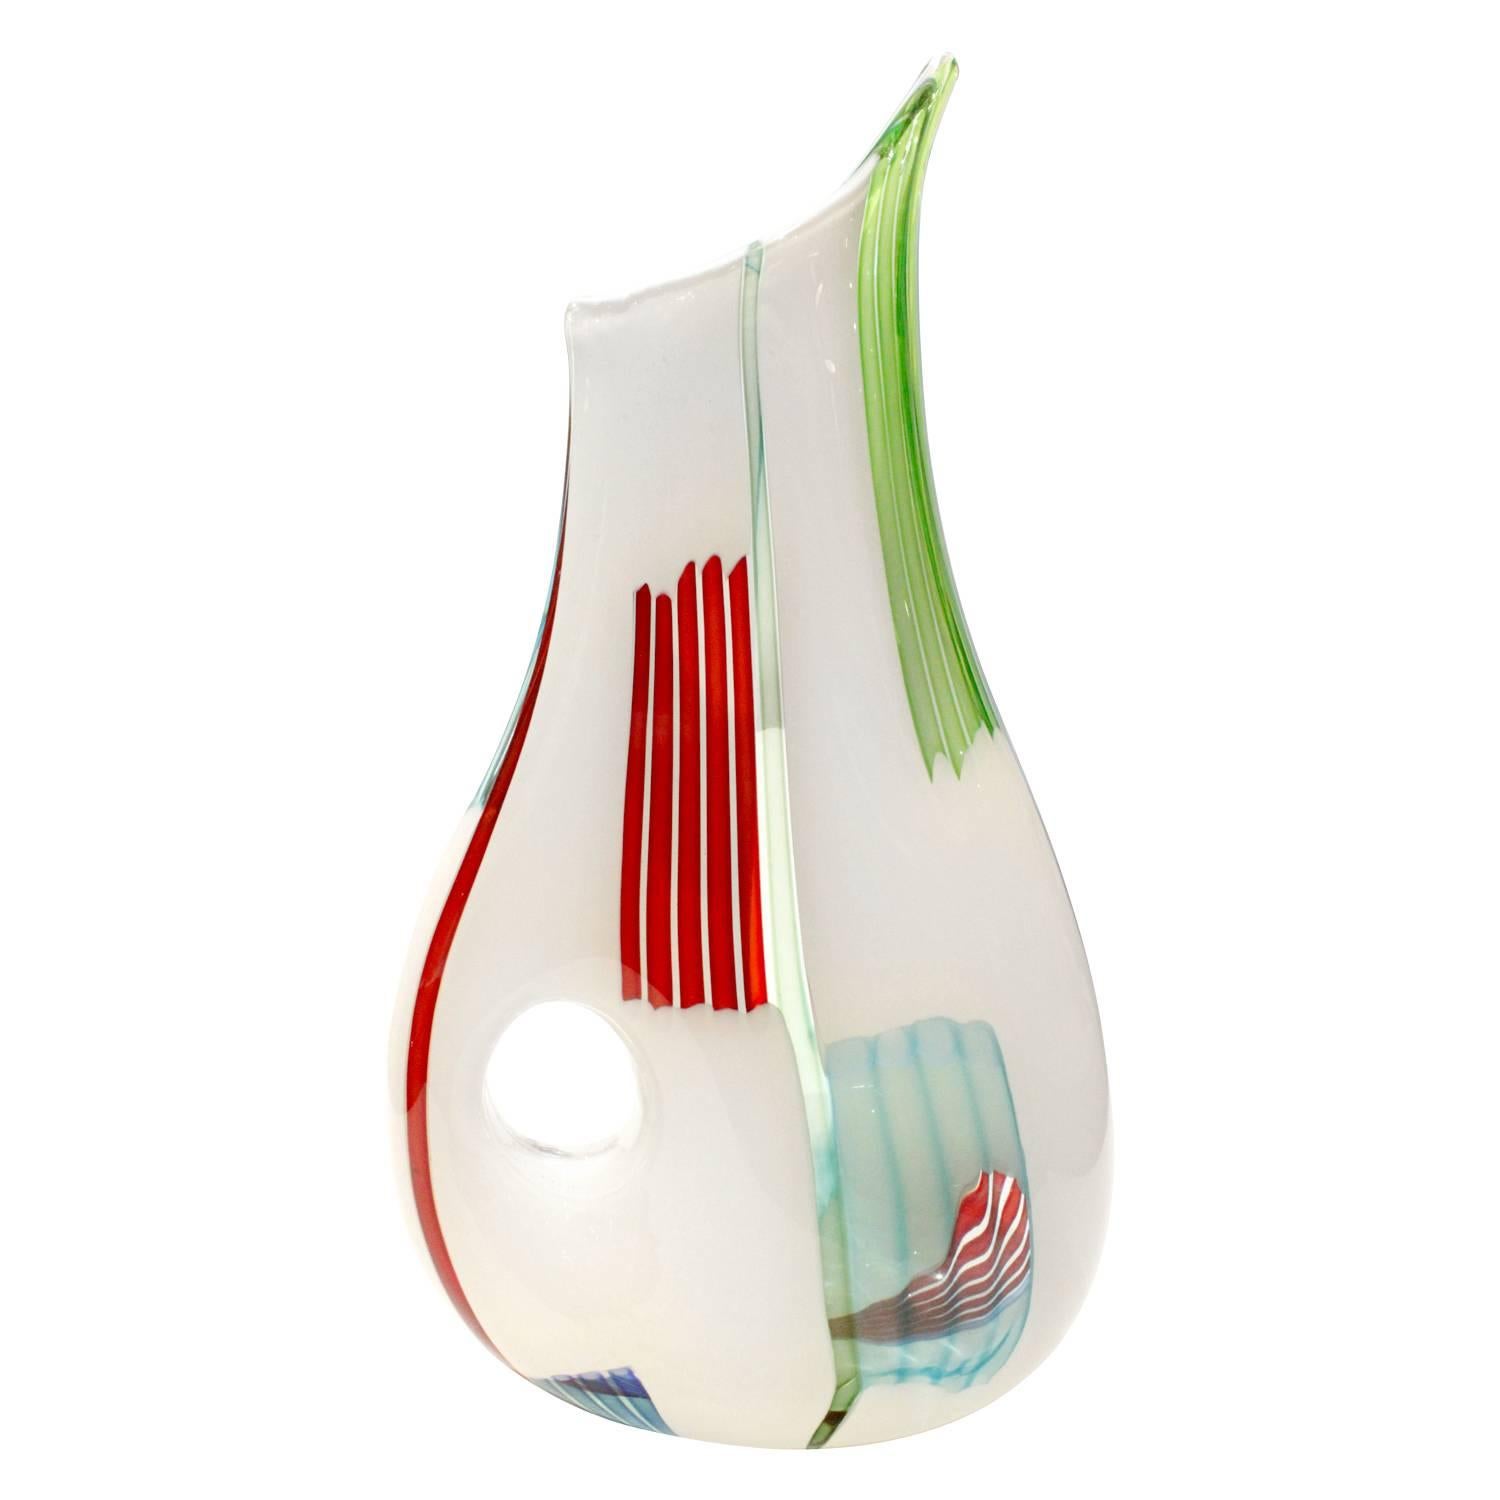 Anzolo Fuga Iconic "Bandier" Vase with Multichrome Rods and Hole, 1950s